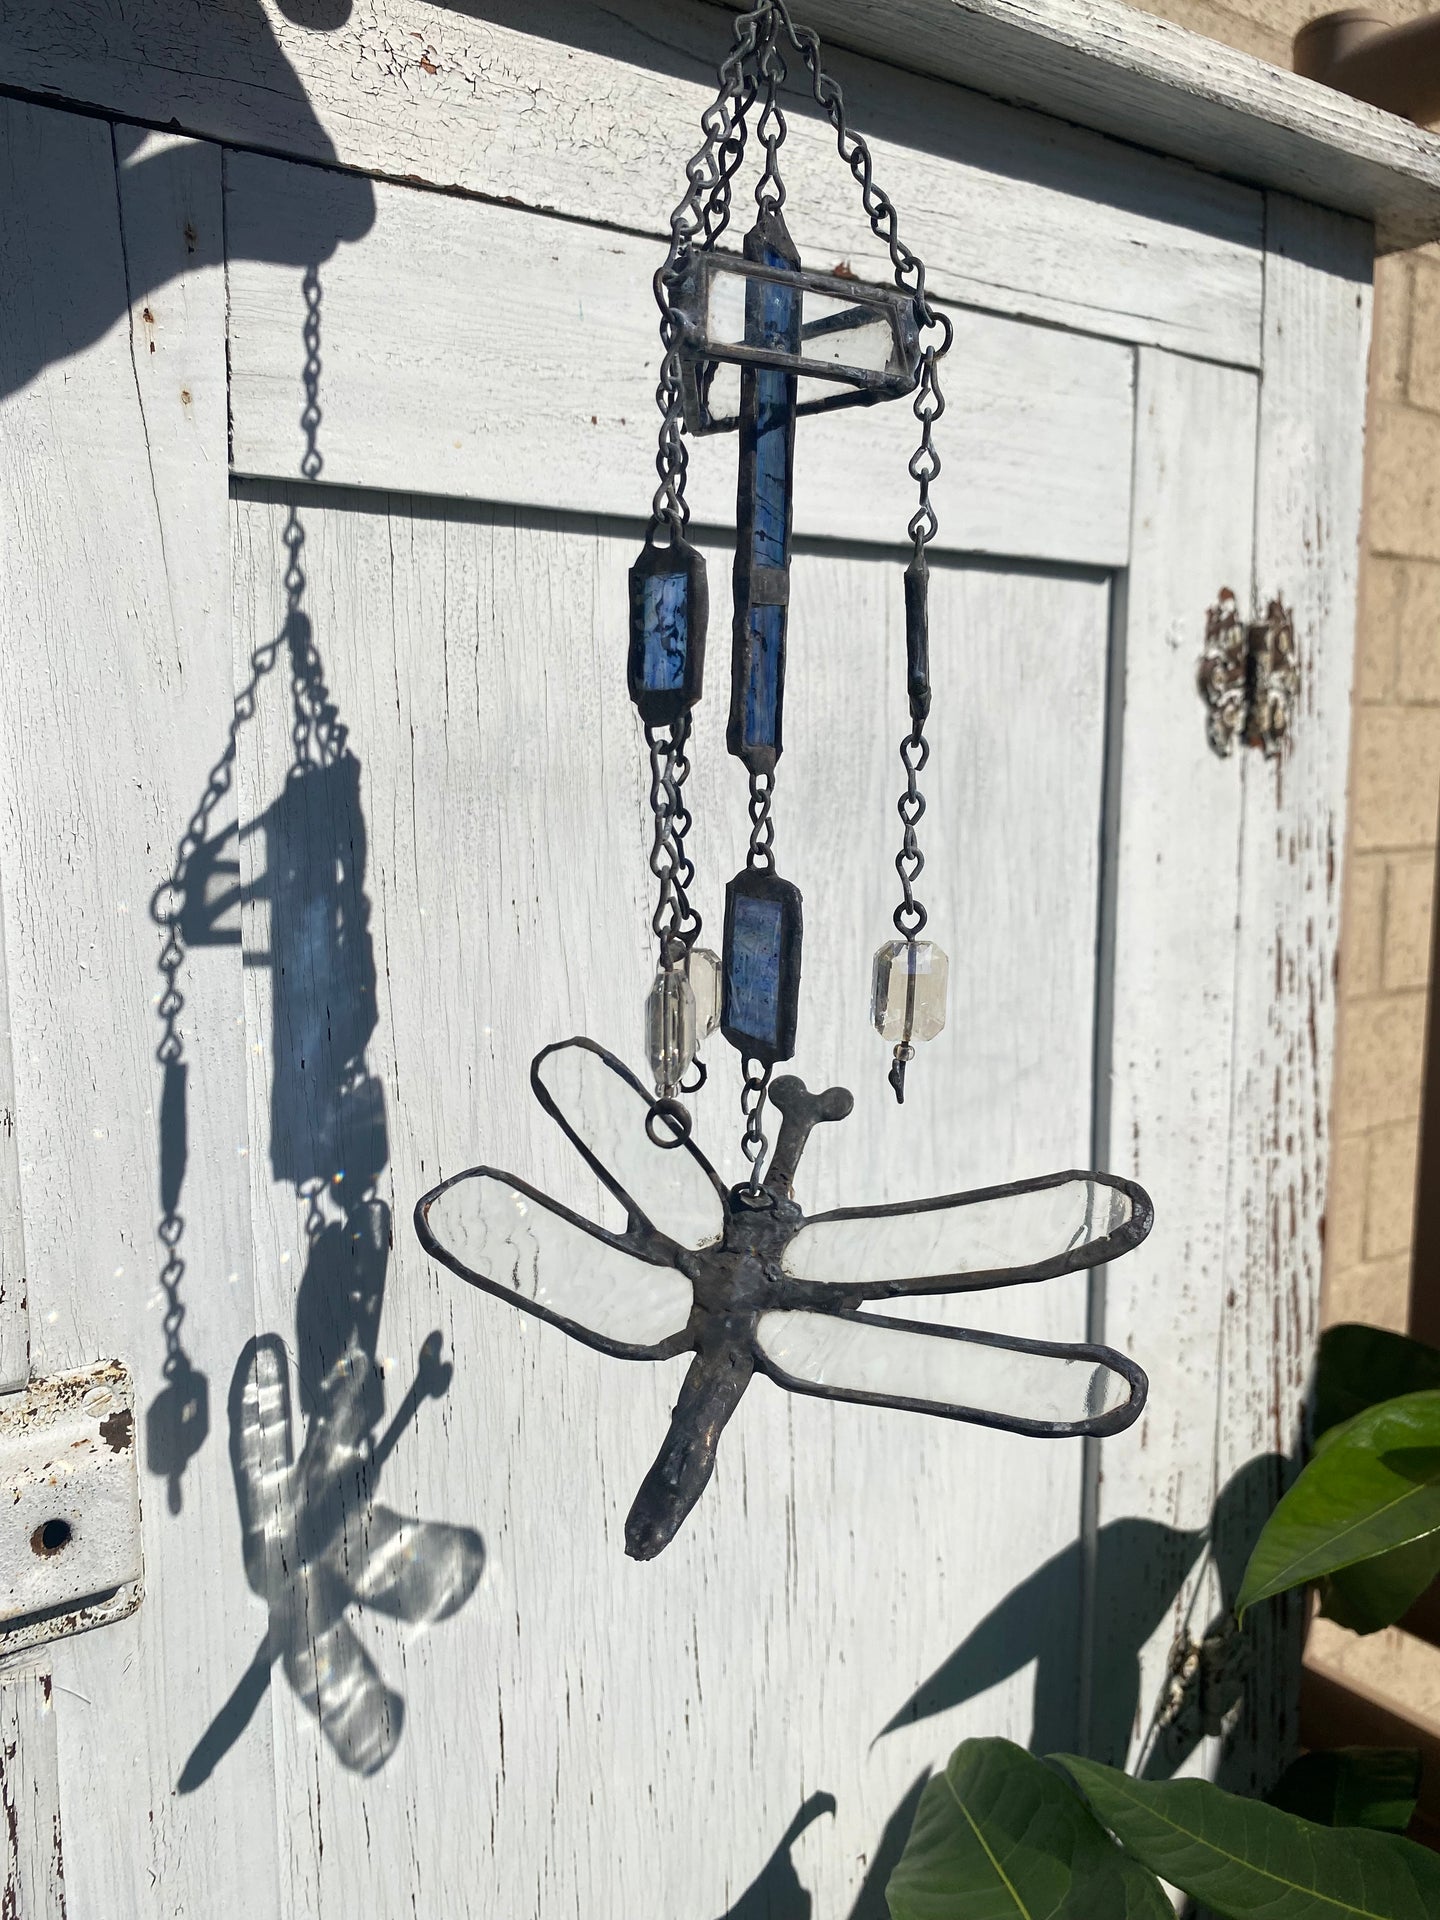 Dragonfly wind chime #2